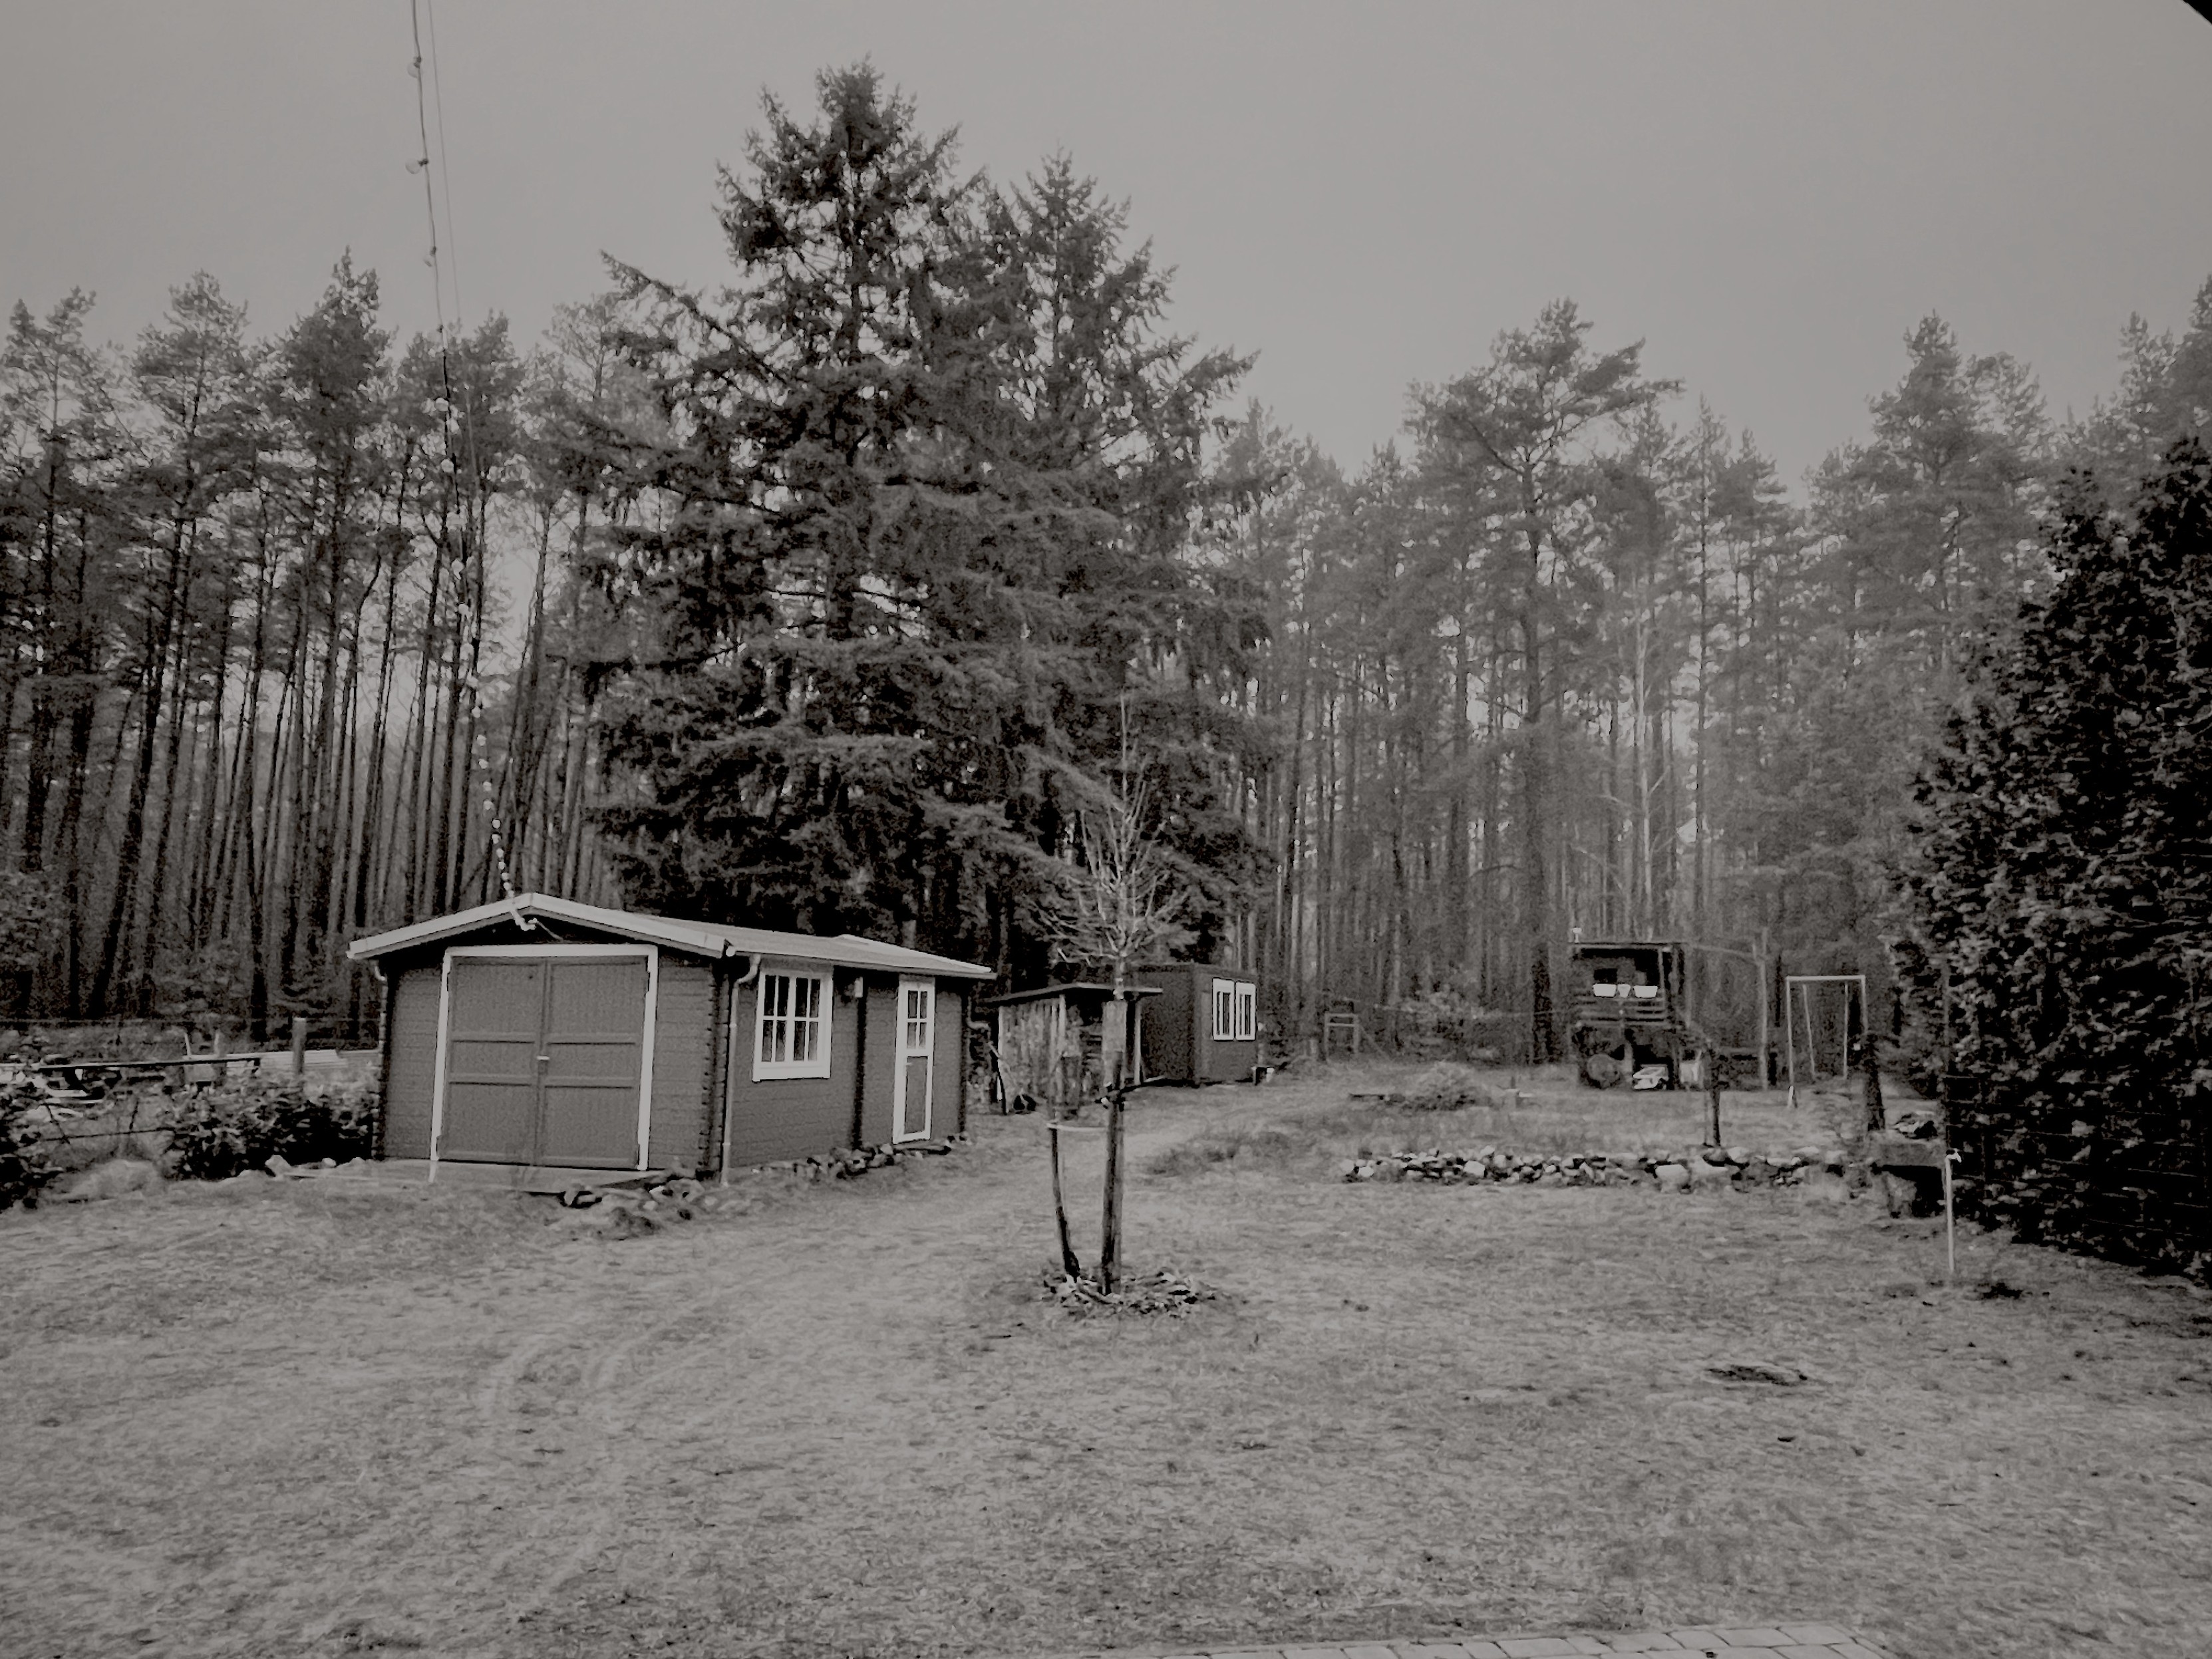 Black and white image of a garden shed next to an open grassy area with a dense background of tall pine trees. There is a pile of firewood and the scenery is rather rainy 